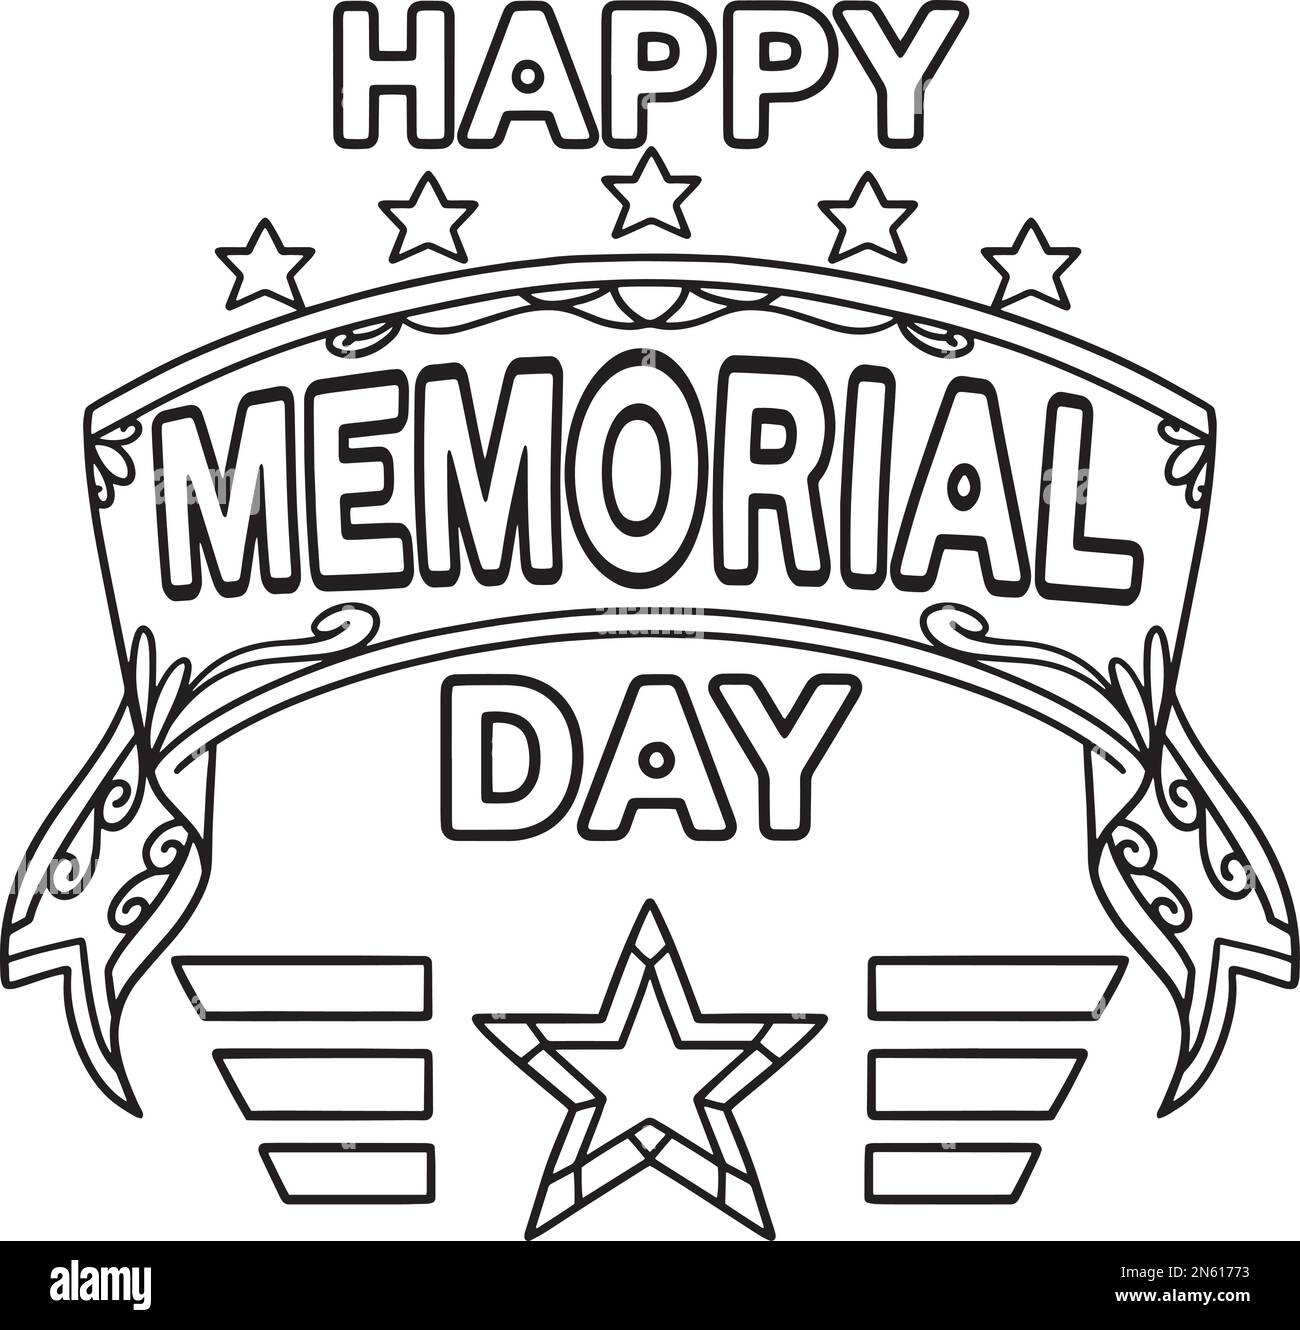 Happy memorial day isolated coloring page for kids stock vector image art